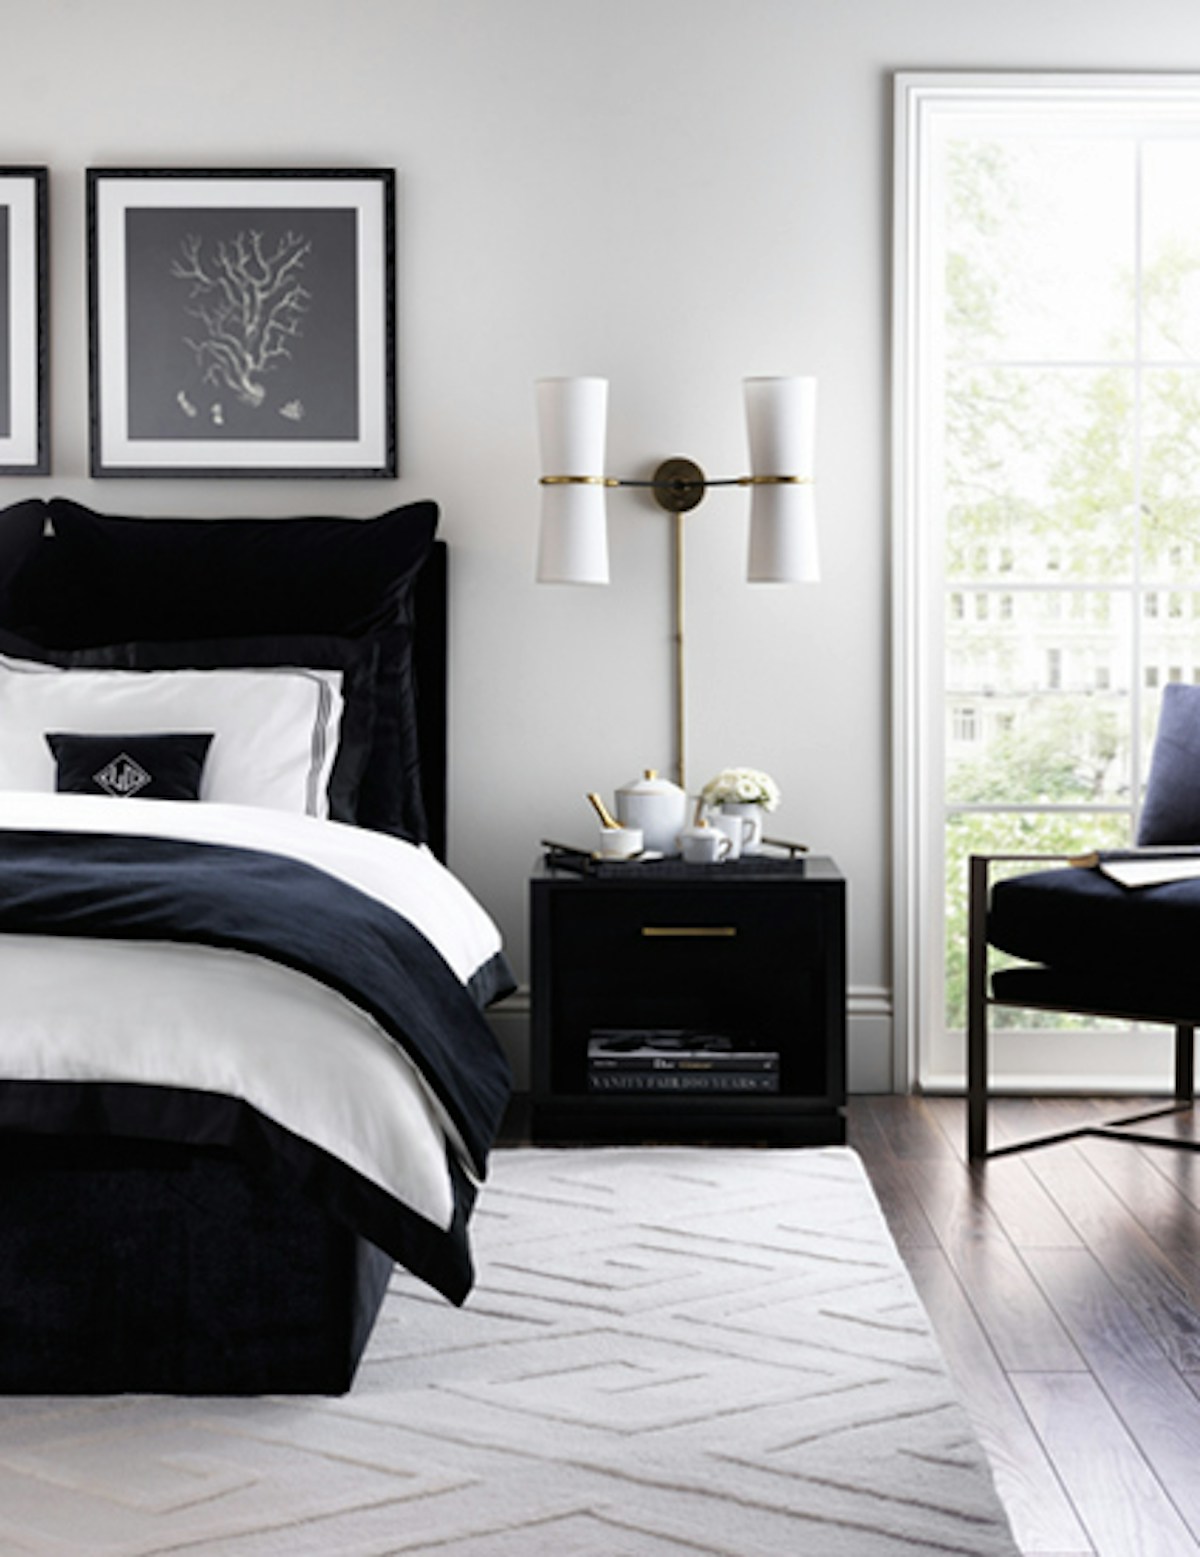 Luxury Bed Buying Guide – Refined Monochrome Collection – Bedroom Ideas - LuxDeco.com Style Guide